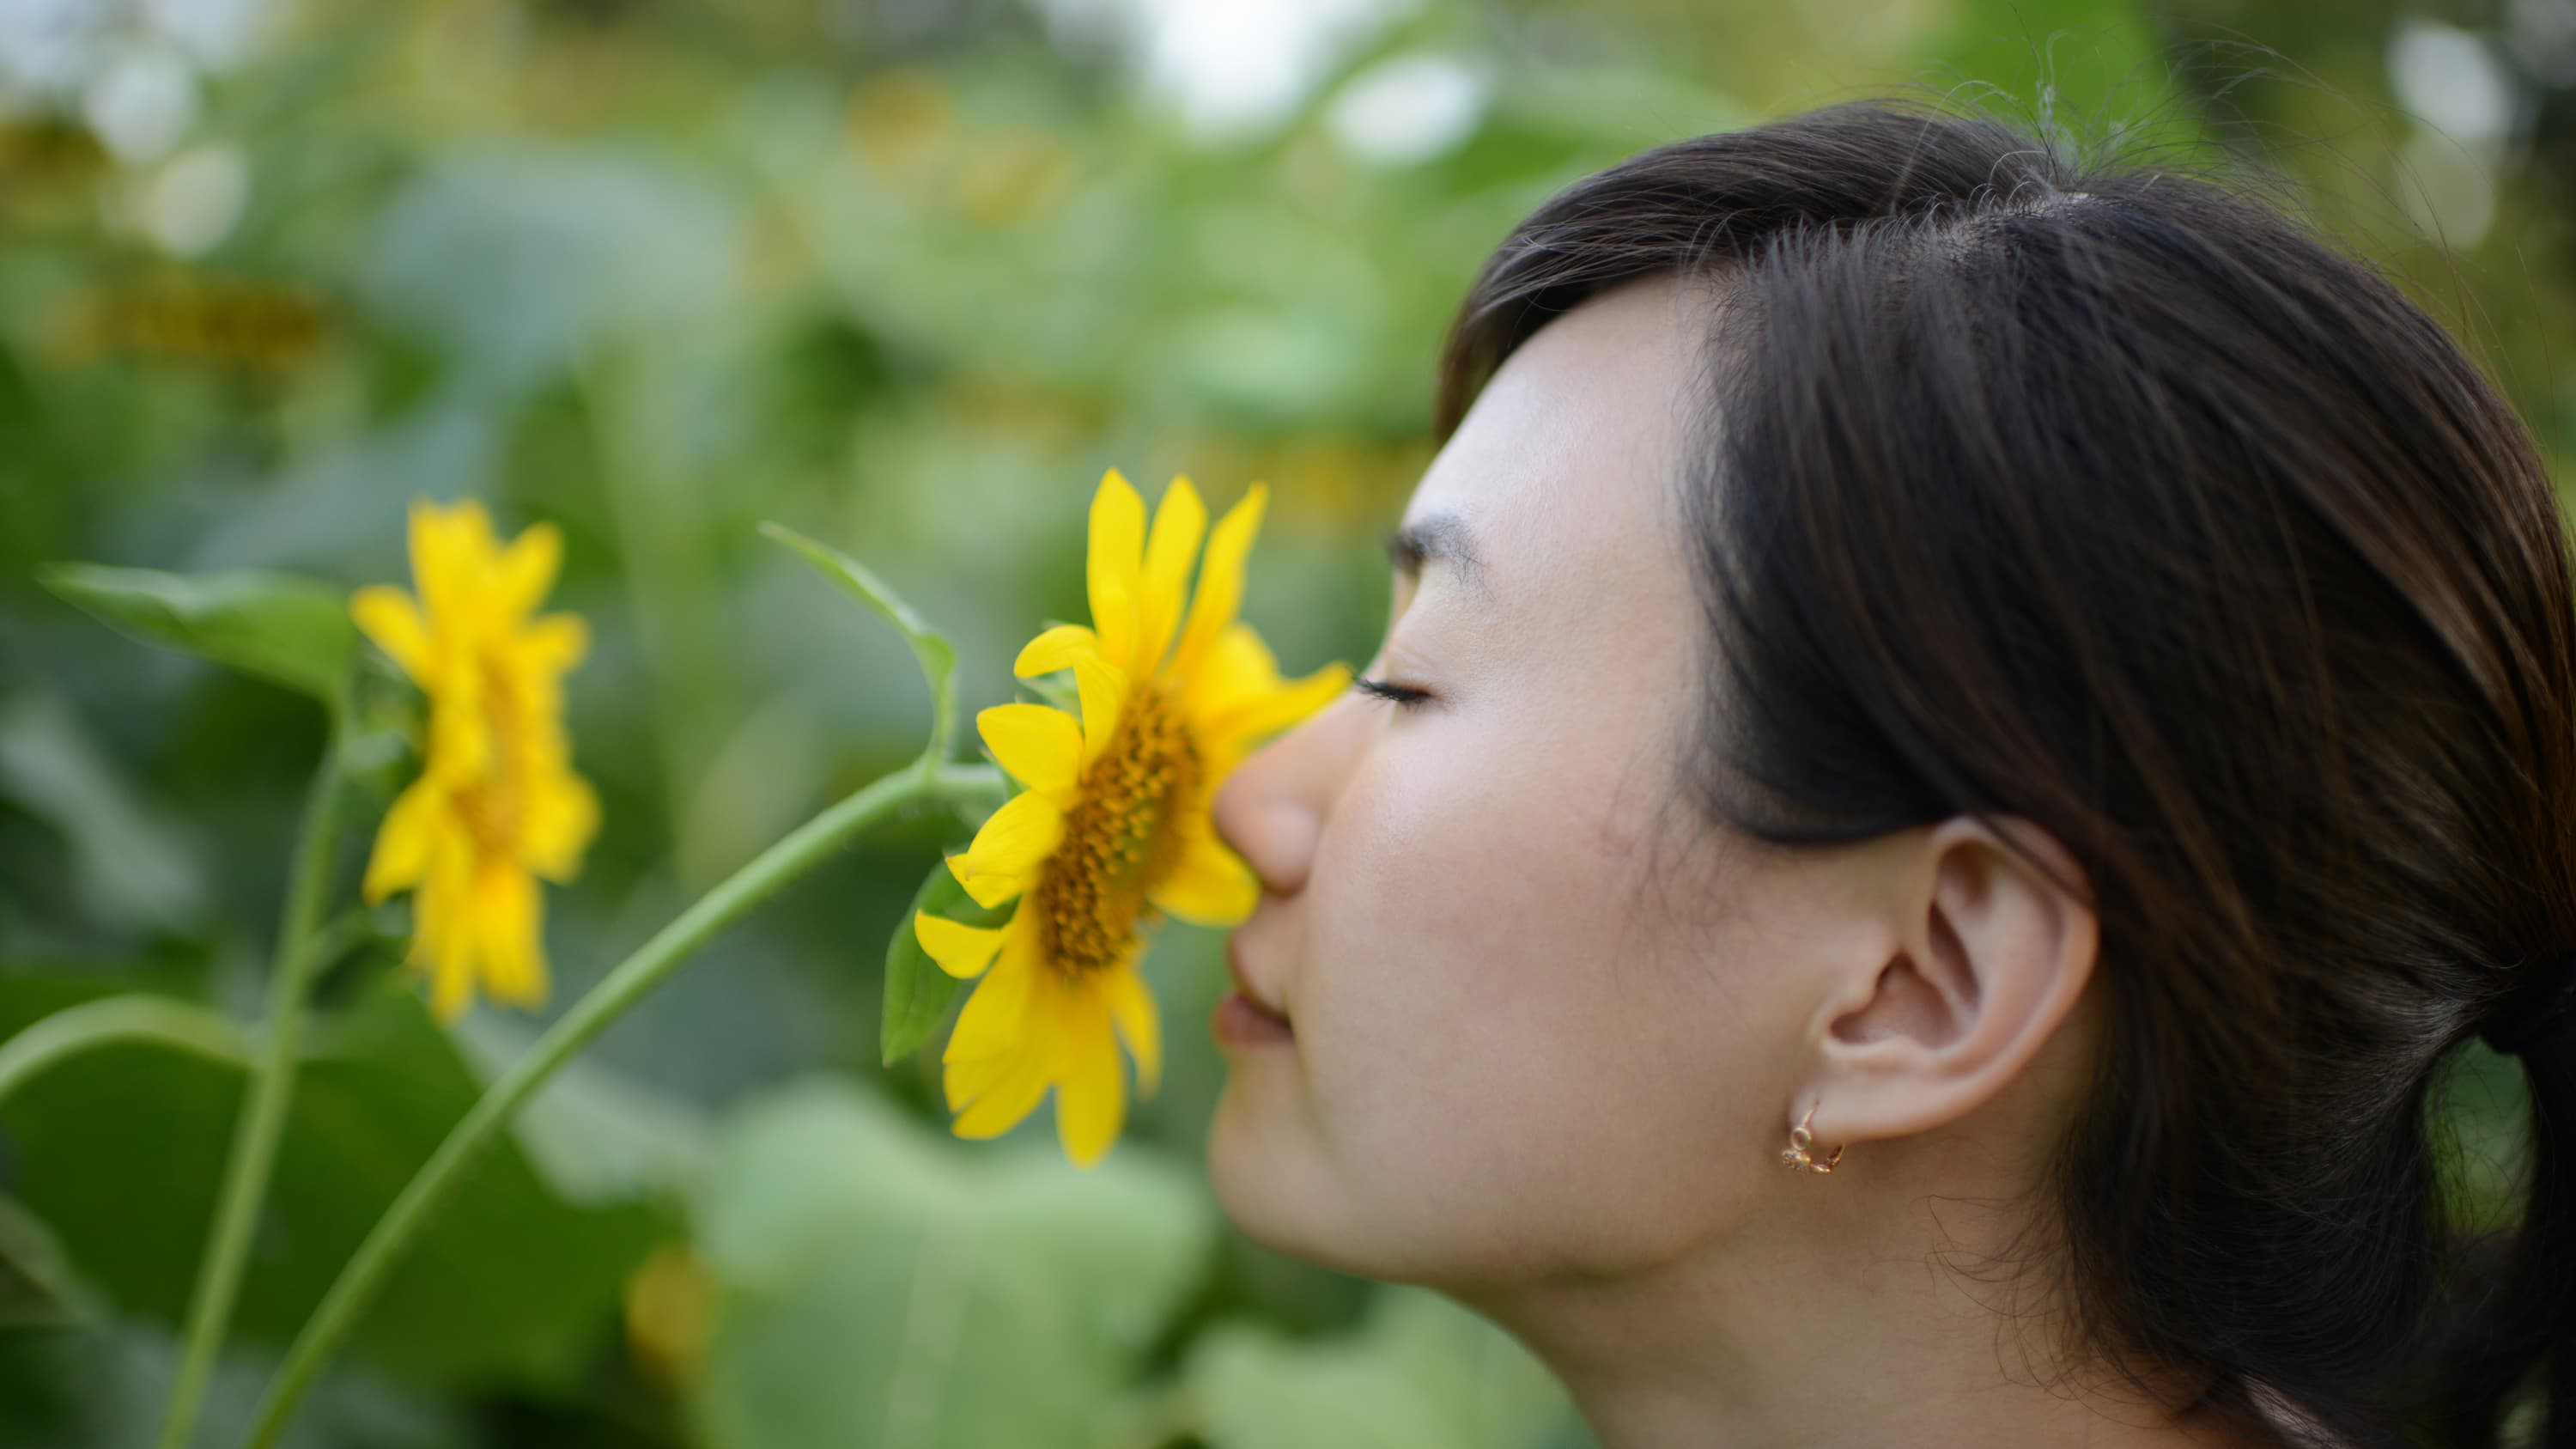 A woman who is trying to (but cannot) smell the flowers because of anosmia.